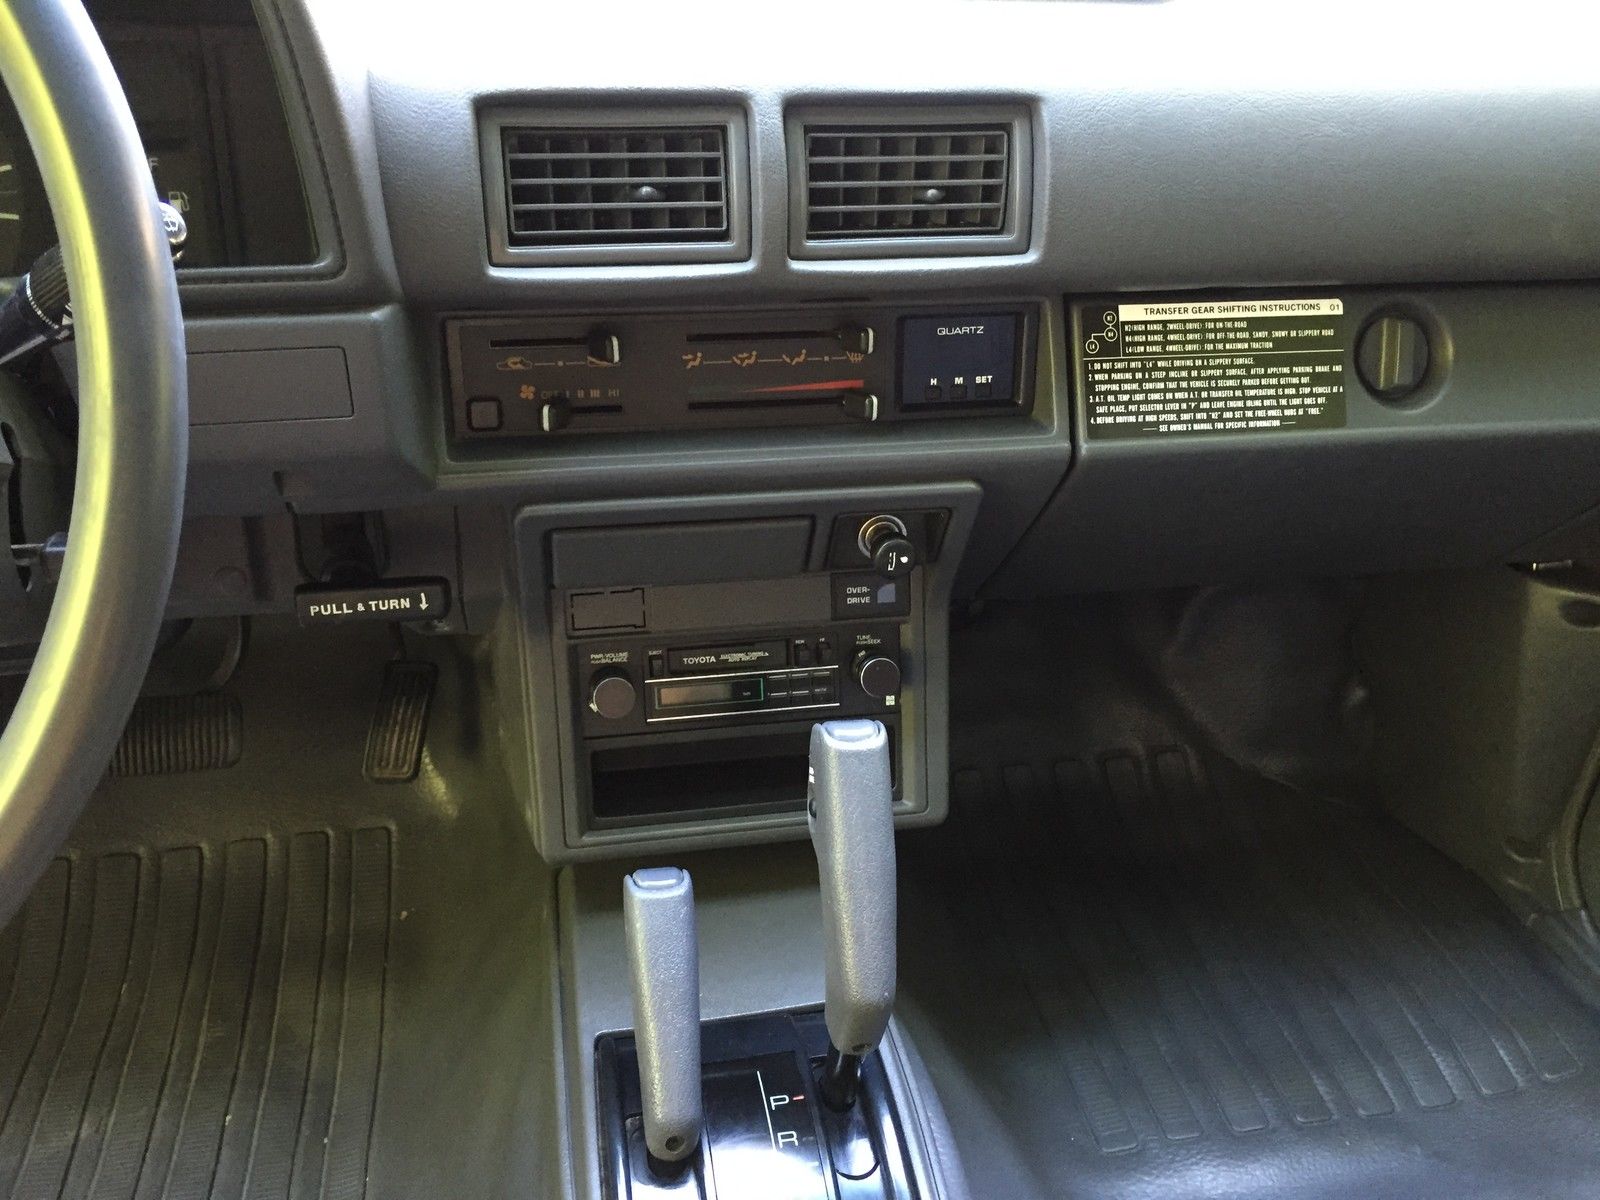 Rare 1987 Toyota Pickup 4x4 Xtra Cab Up for Sale on eBay ... prius fuse box location 